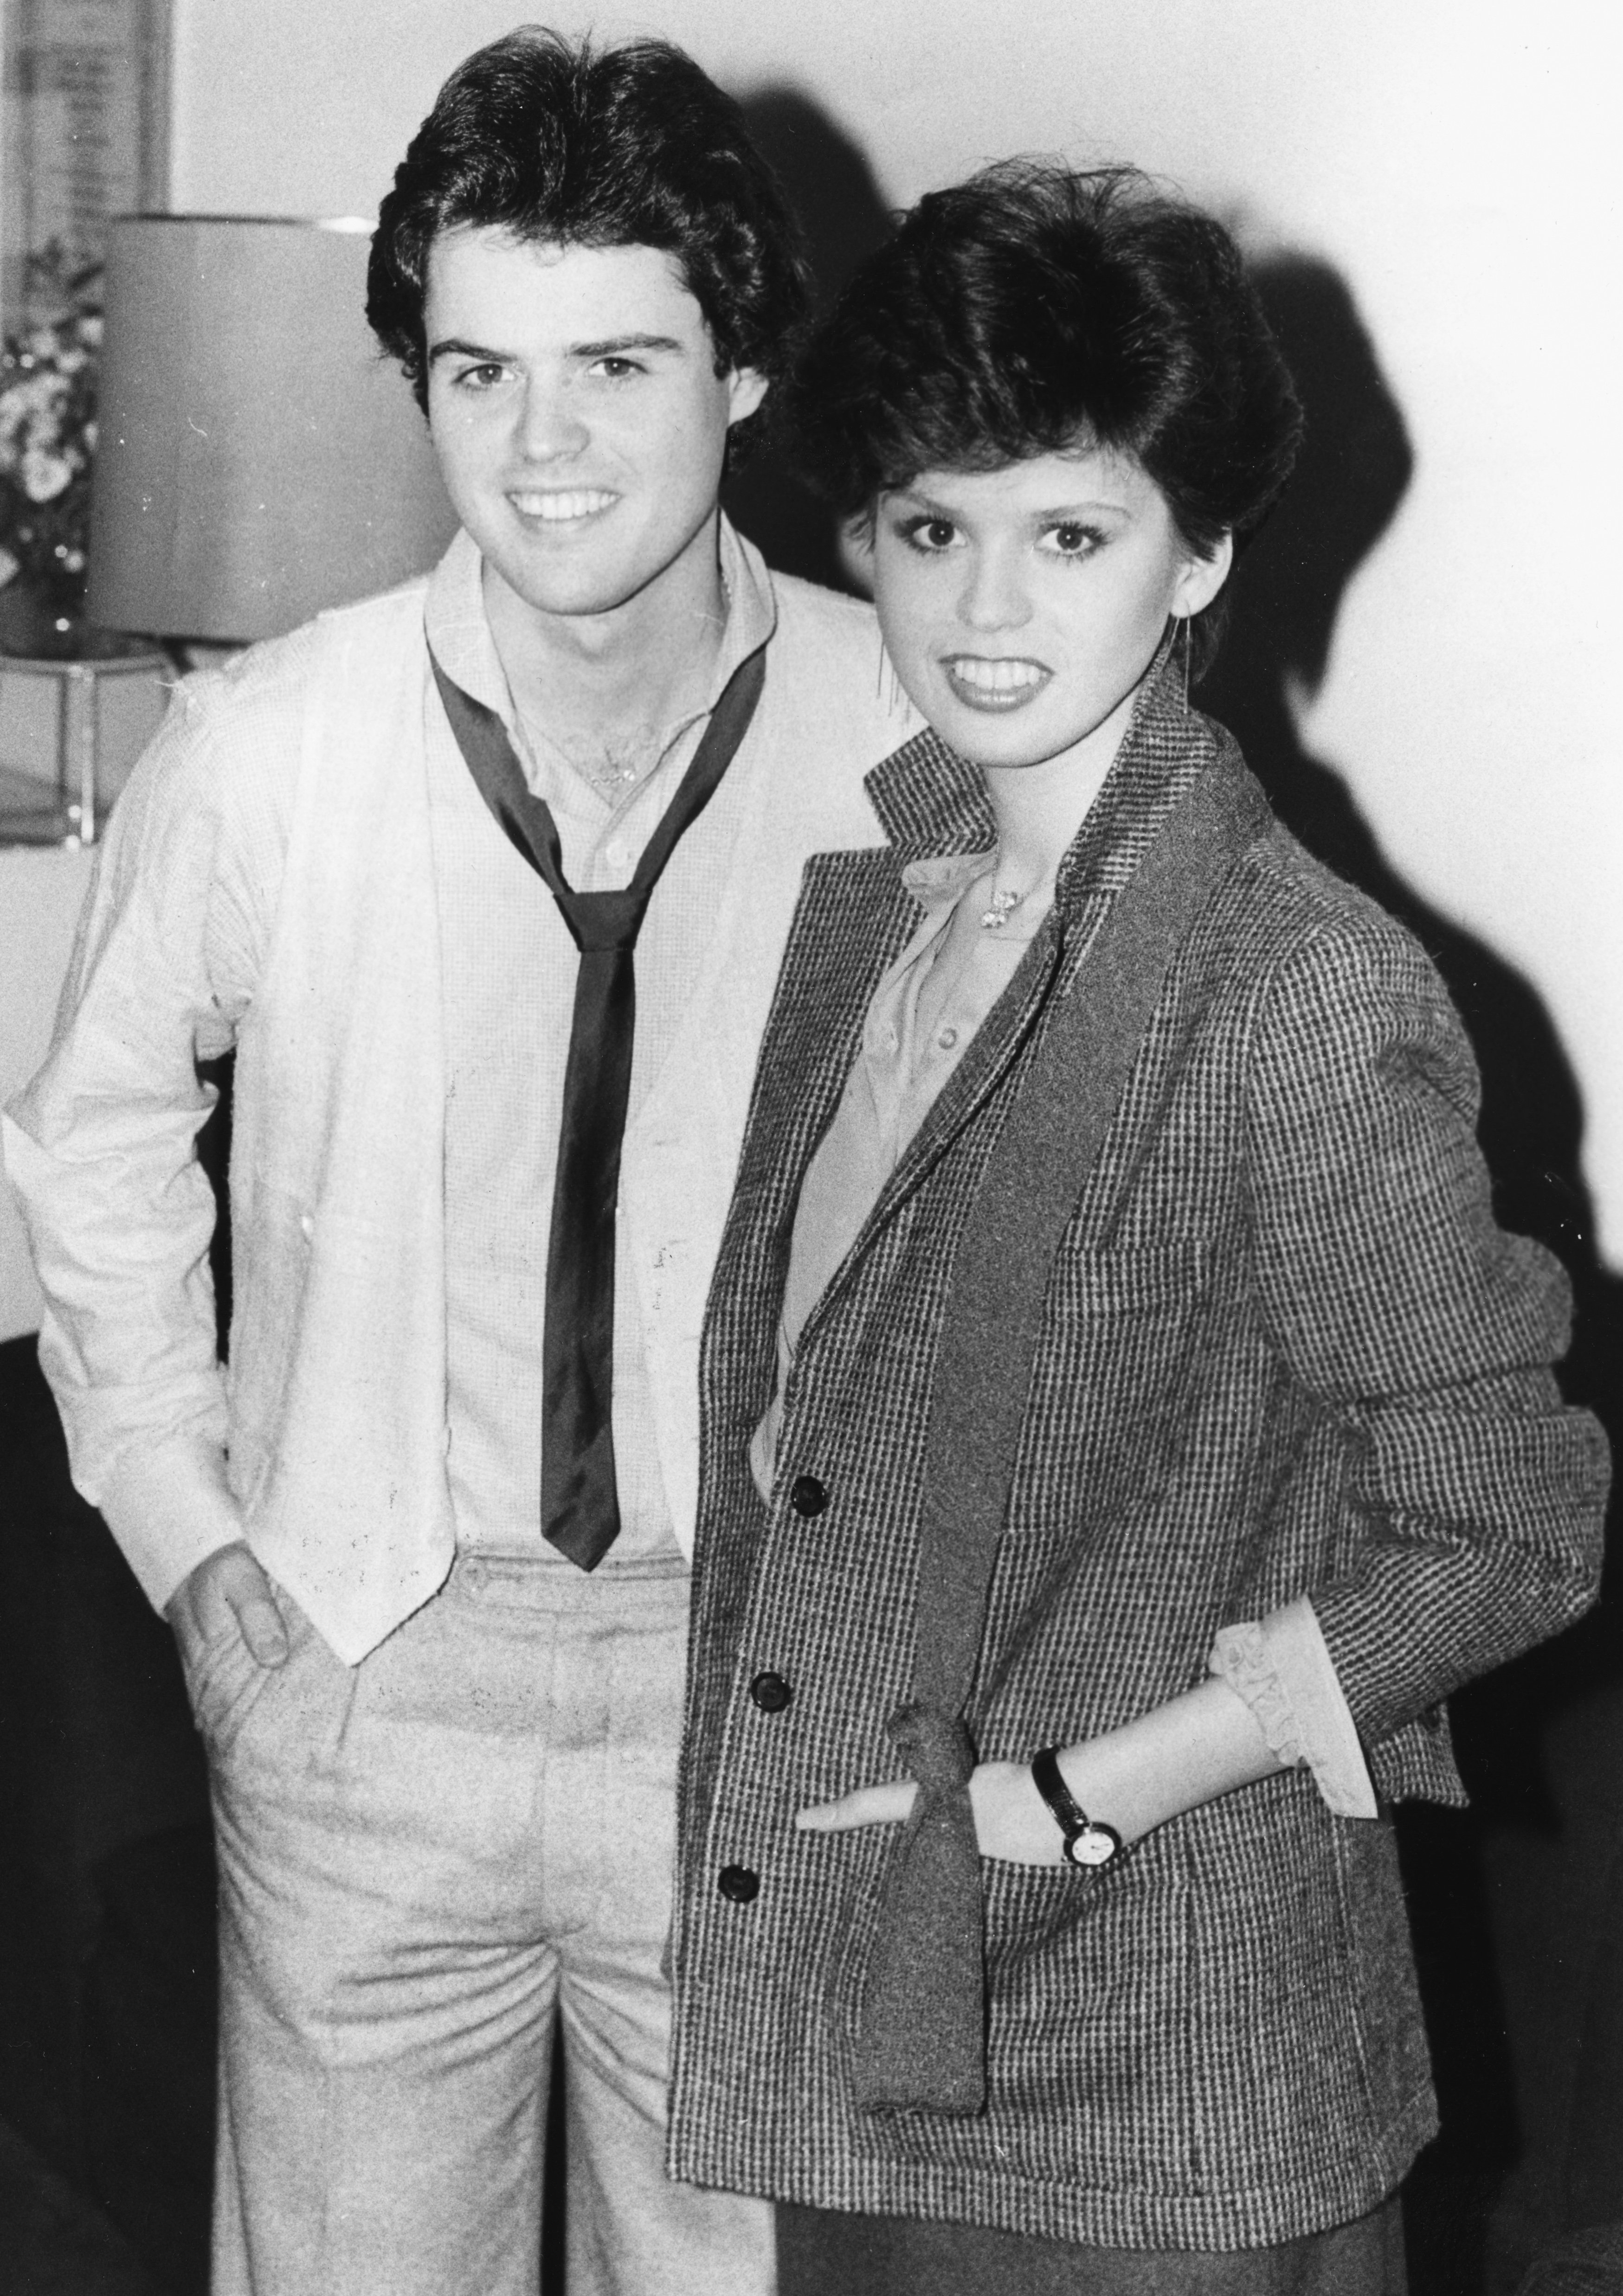 Donny and Marie Osmond, smiling for the cameras at a press conference, London, January 22nd 1979. | Source: Getty Images.